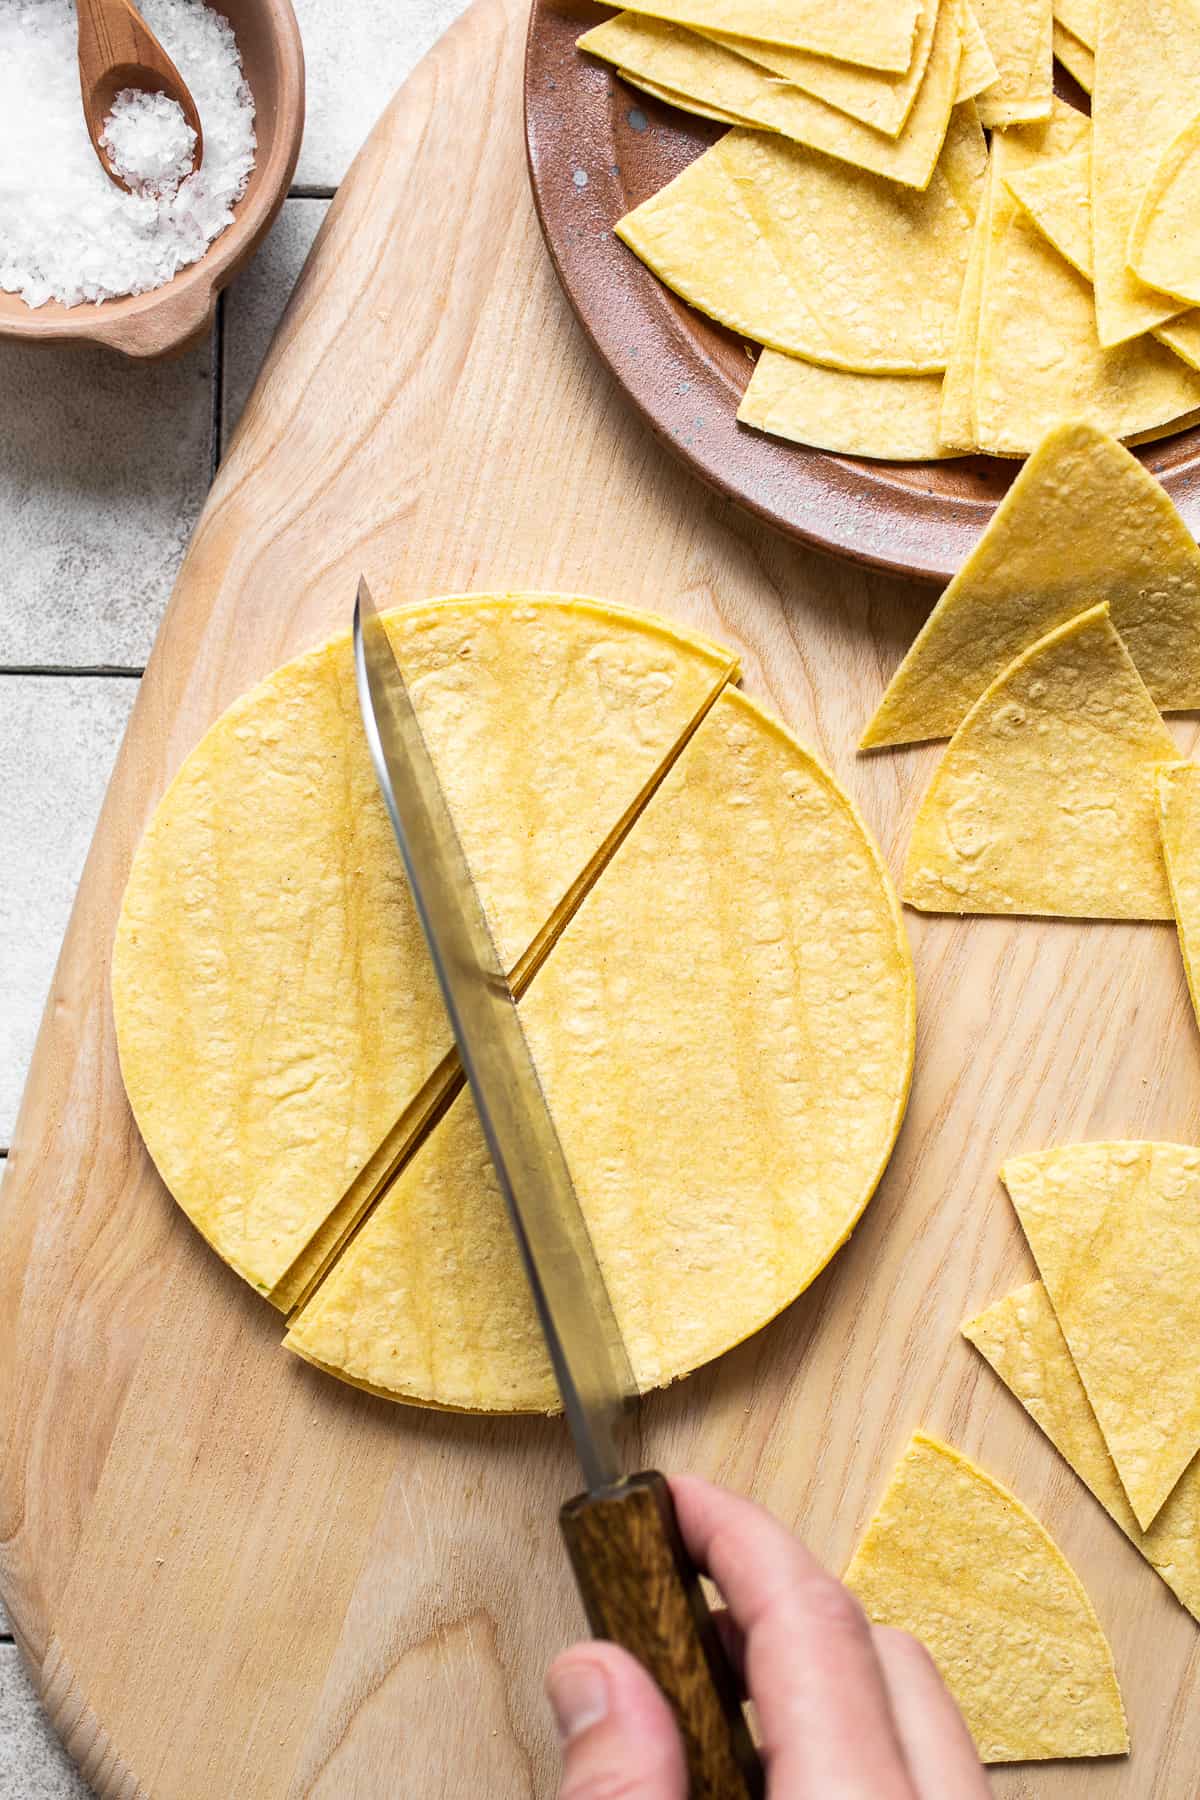 Corn tortillas on a cutting board being sliced into triangles for tortilla chips.